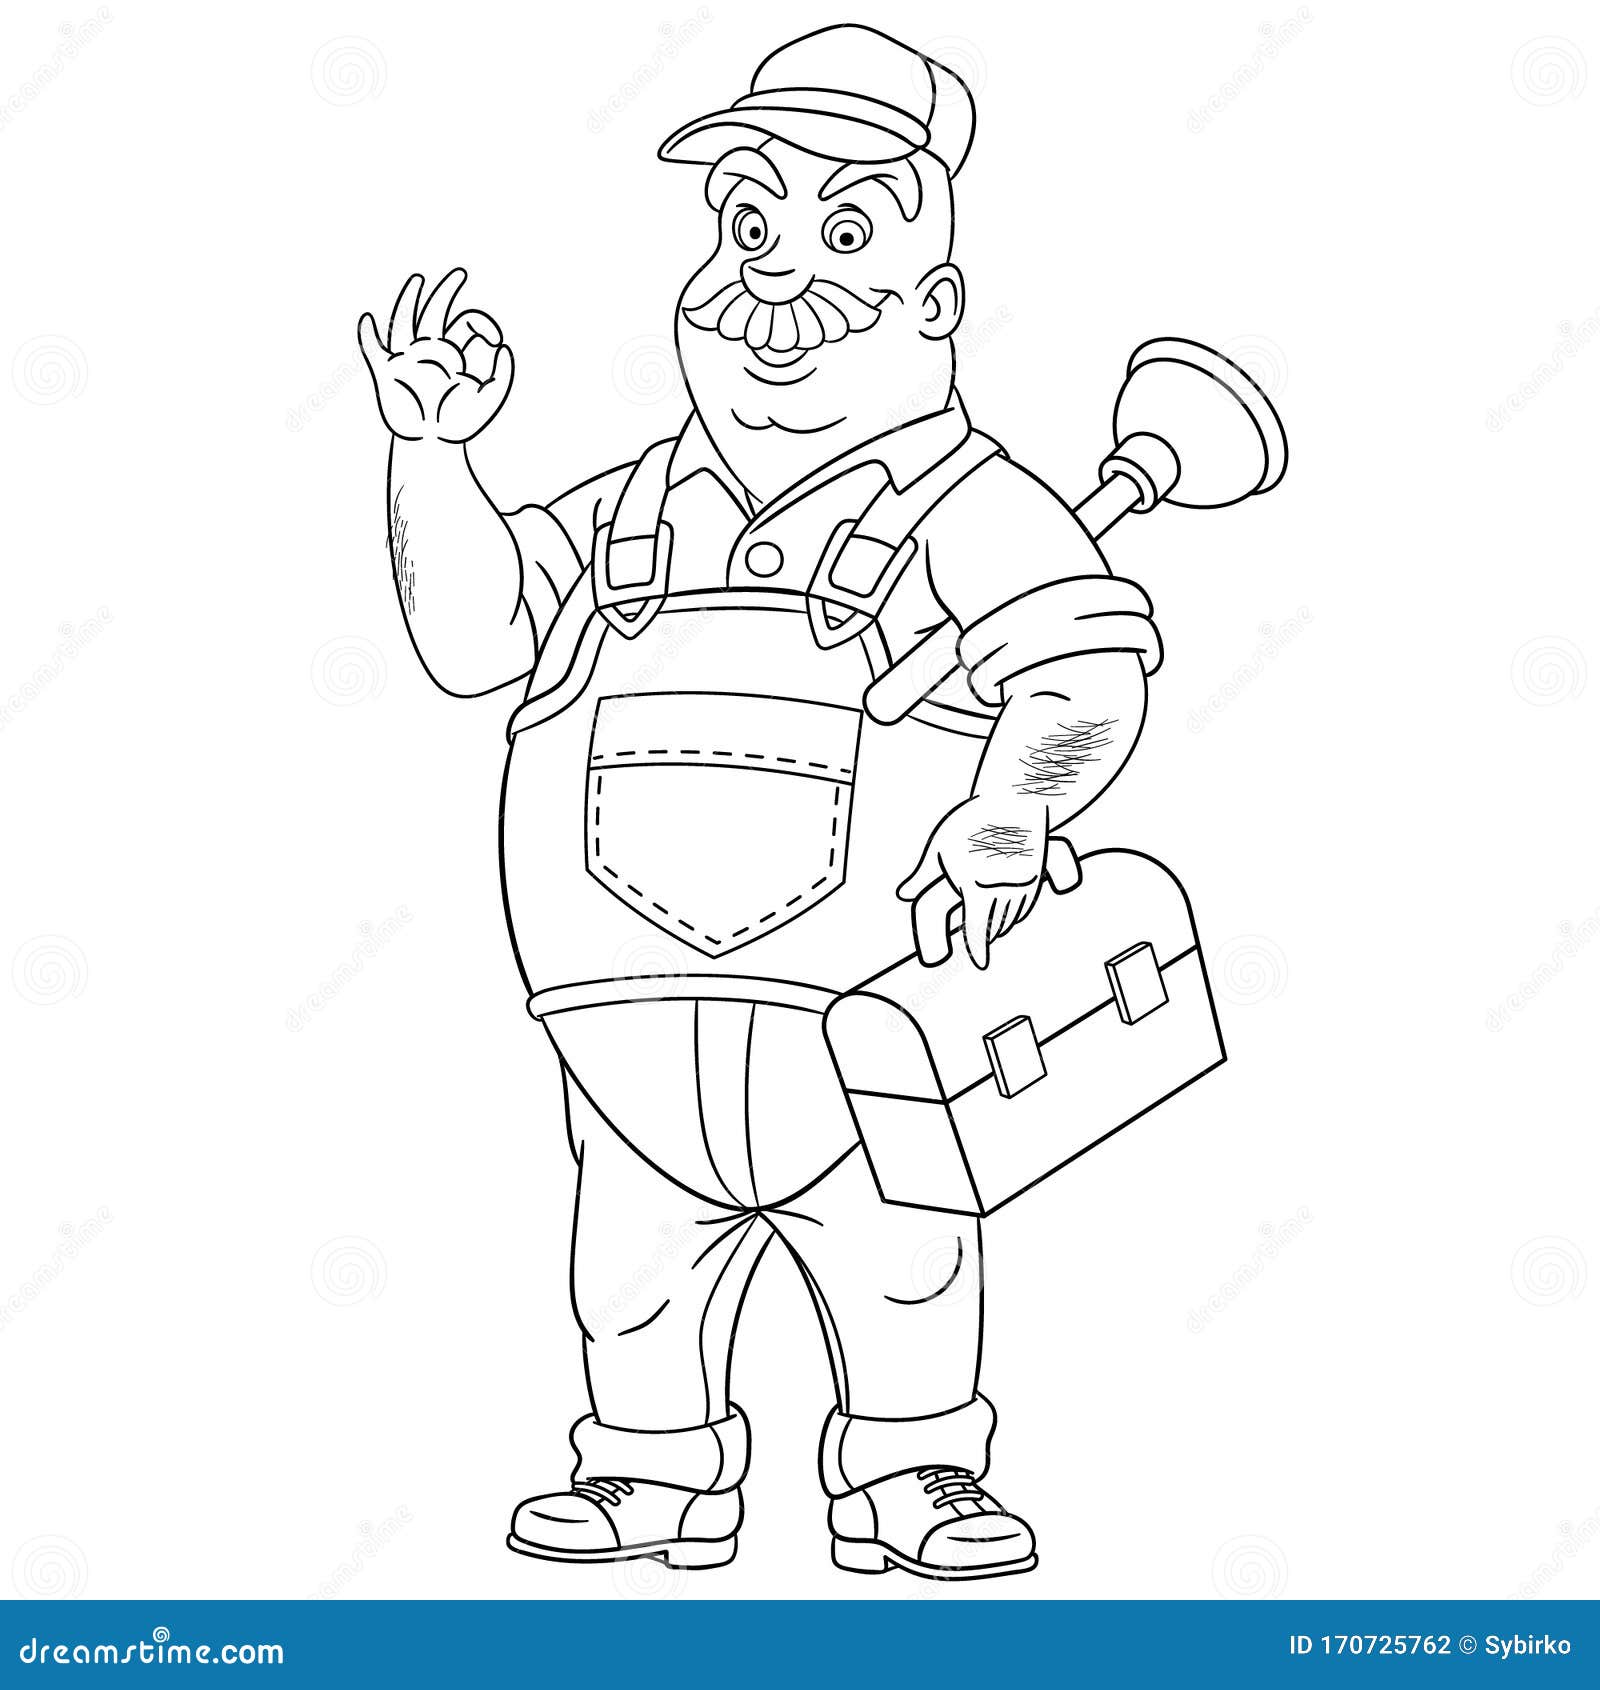 Download Coloring Page With Plumber Worker Stock Vector - Illustration of hand, happy: 170725762